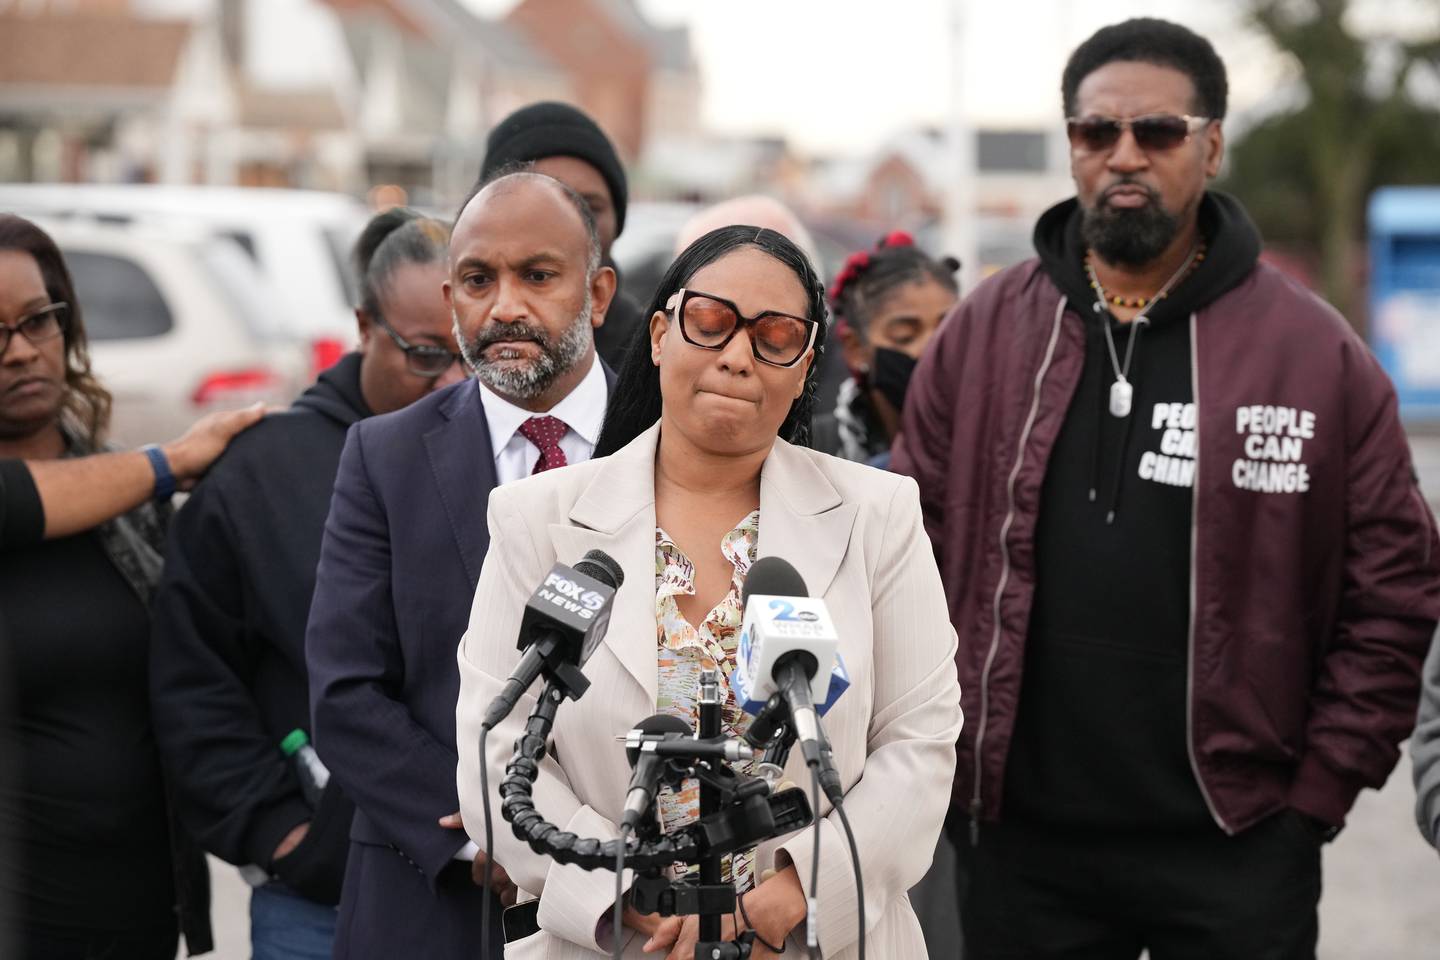 Family and friends of 16-year-old Edmondson, Dennta Dorsey who was the student killed yesterday, and Attorney Thiur Vignarajah (left) during a press conference at the Edmondson Village, site of the shooting.